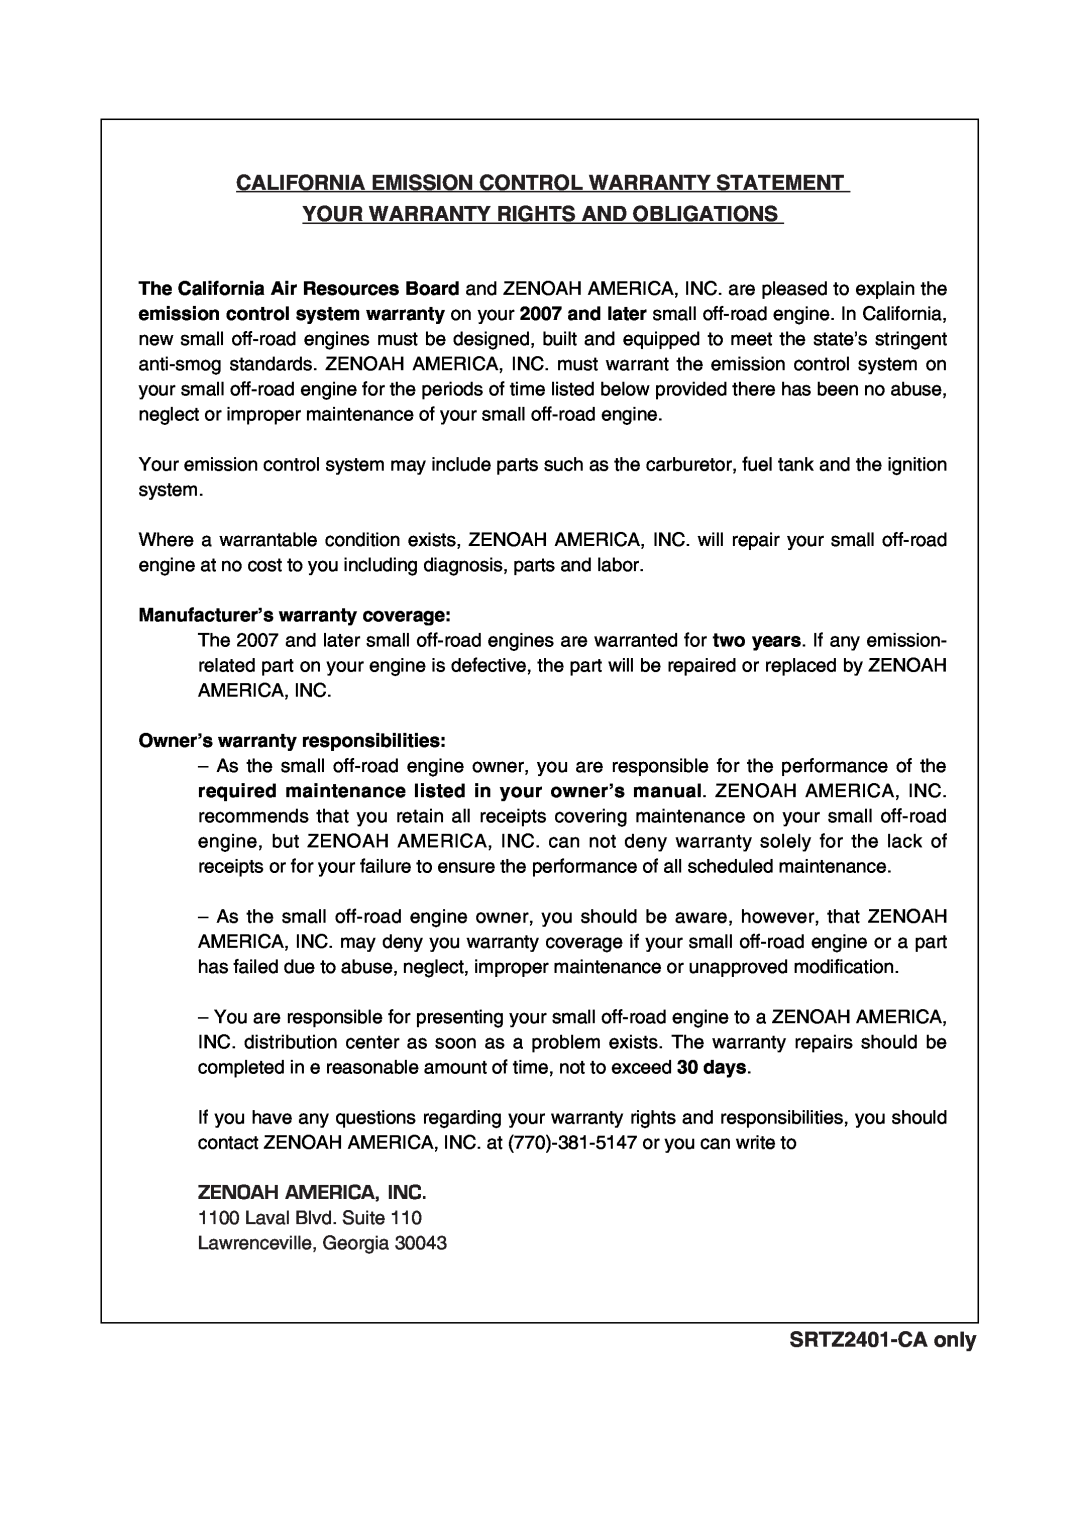 Univex manual California Emission Control Warranty Statement, Your Warranty Rights And Obligations, SRTZ2401-CAonly 